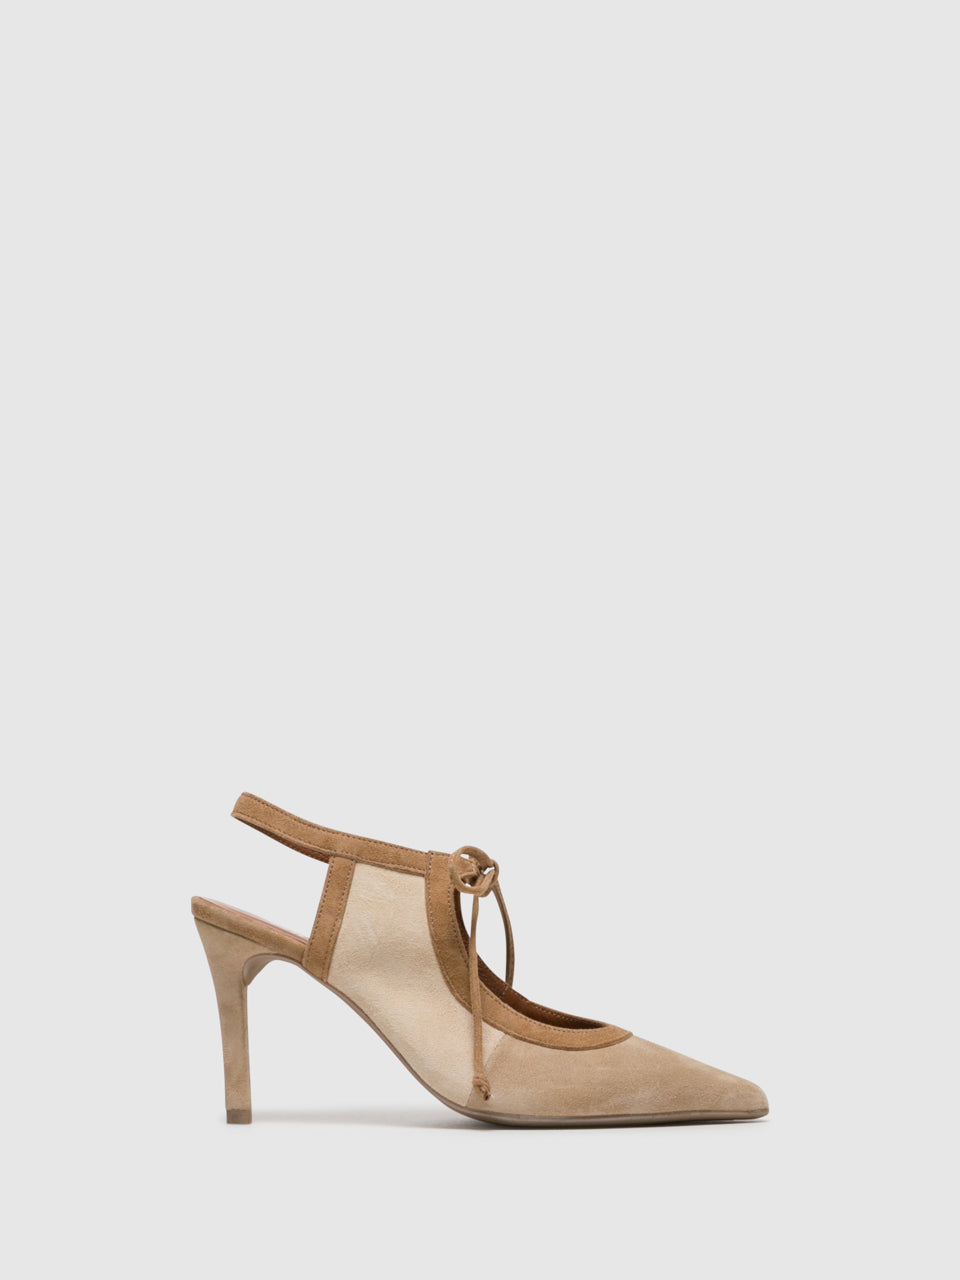 Foreva Beige Pointed Toe Shoes